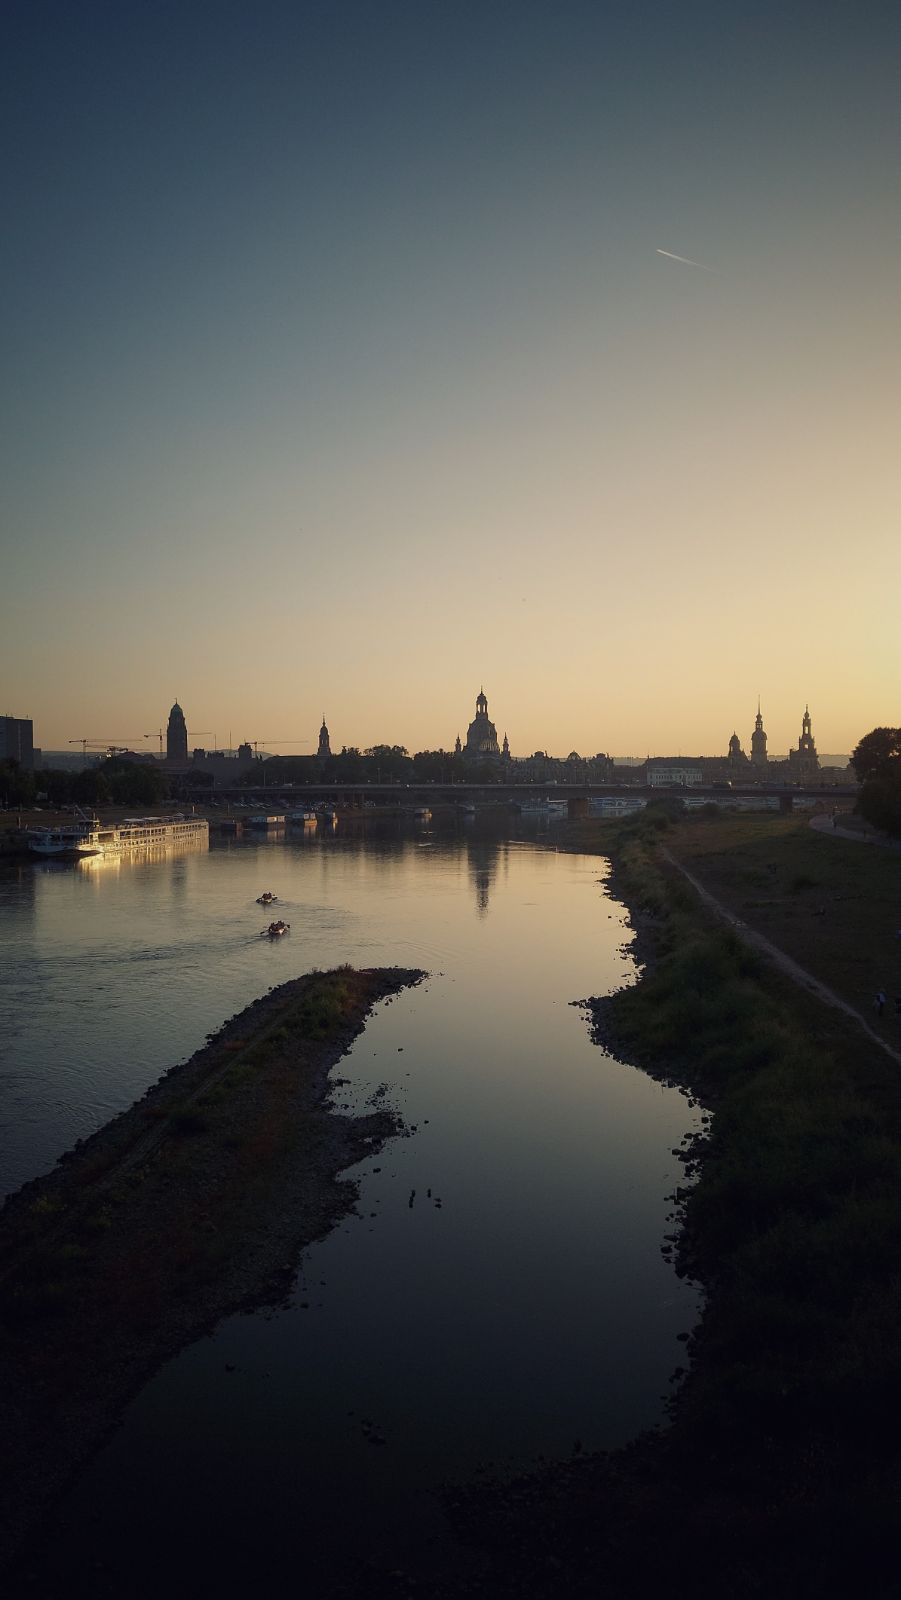 Old Dresden baroque skyline in early dusk. River banks in front of the picture. Quiet waters.